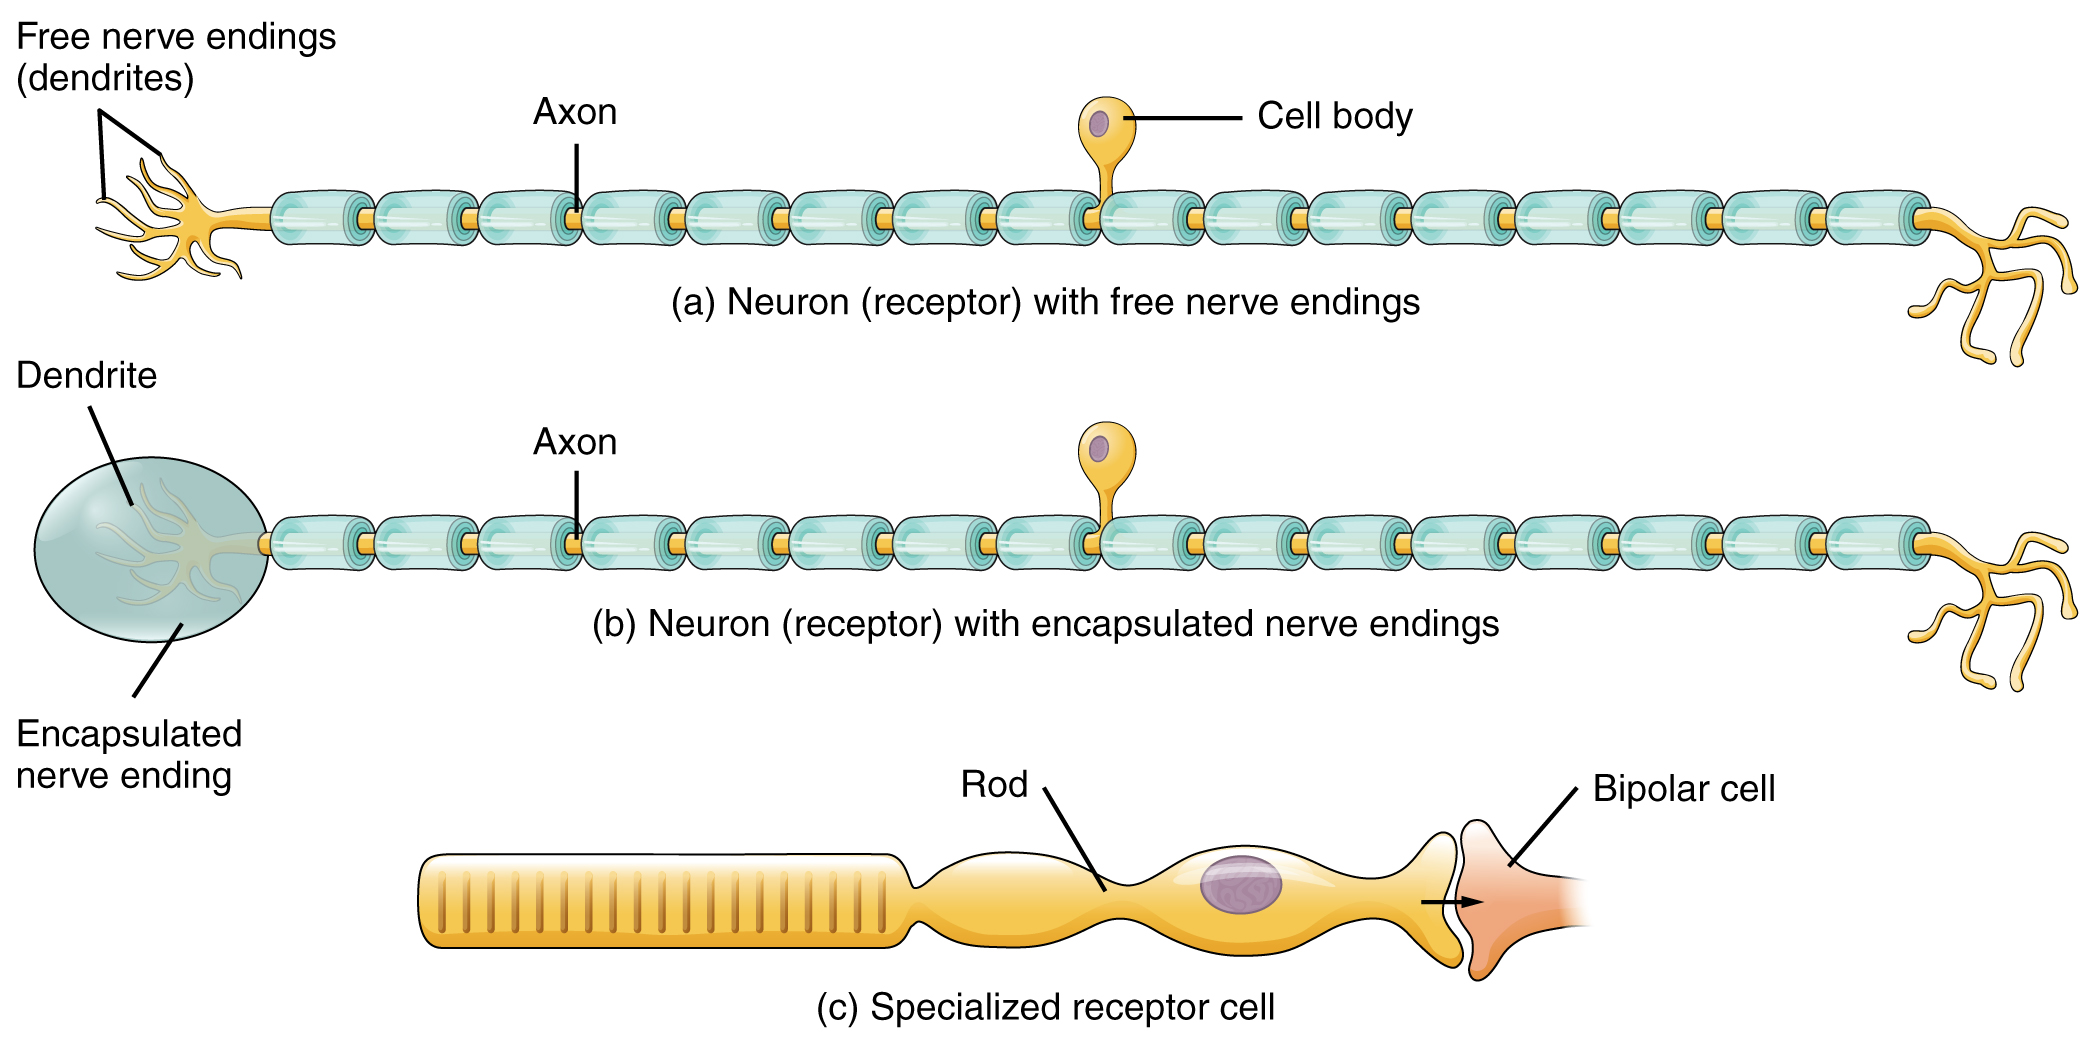 what type of sensory neuron responds to green light